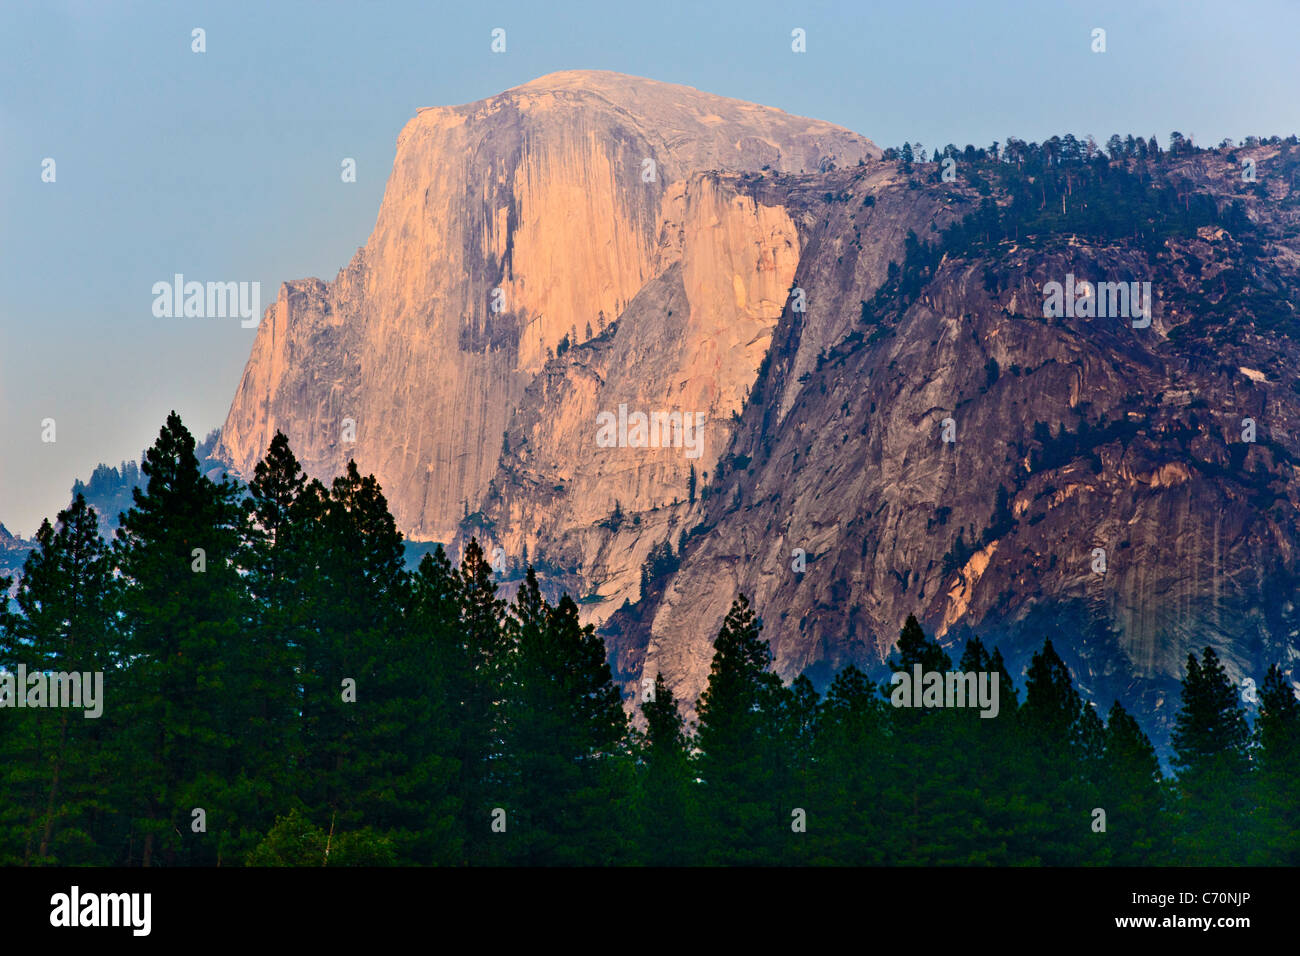 Half Dome, Yosemite National Park, USA, bathed in evening sunlight with blue smoke haze of forest fire. JMH5251 Stock Photo